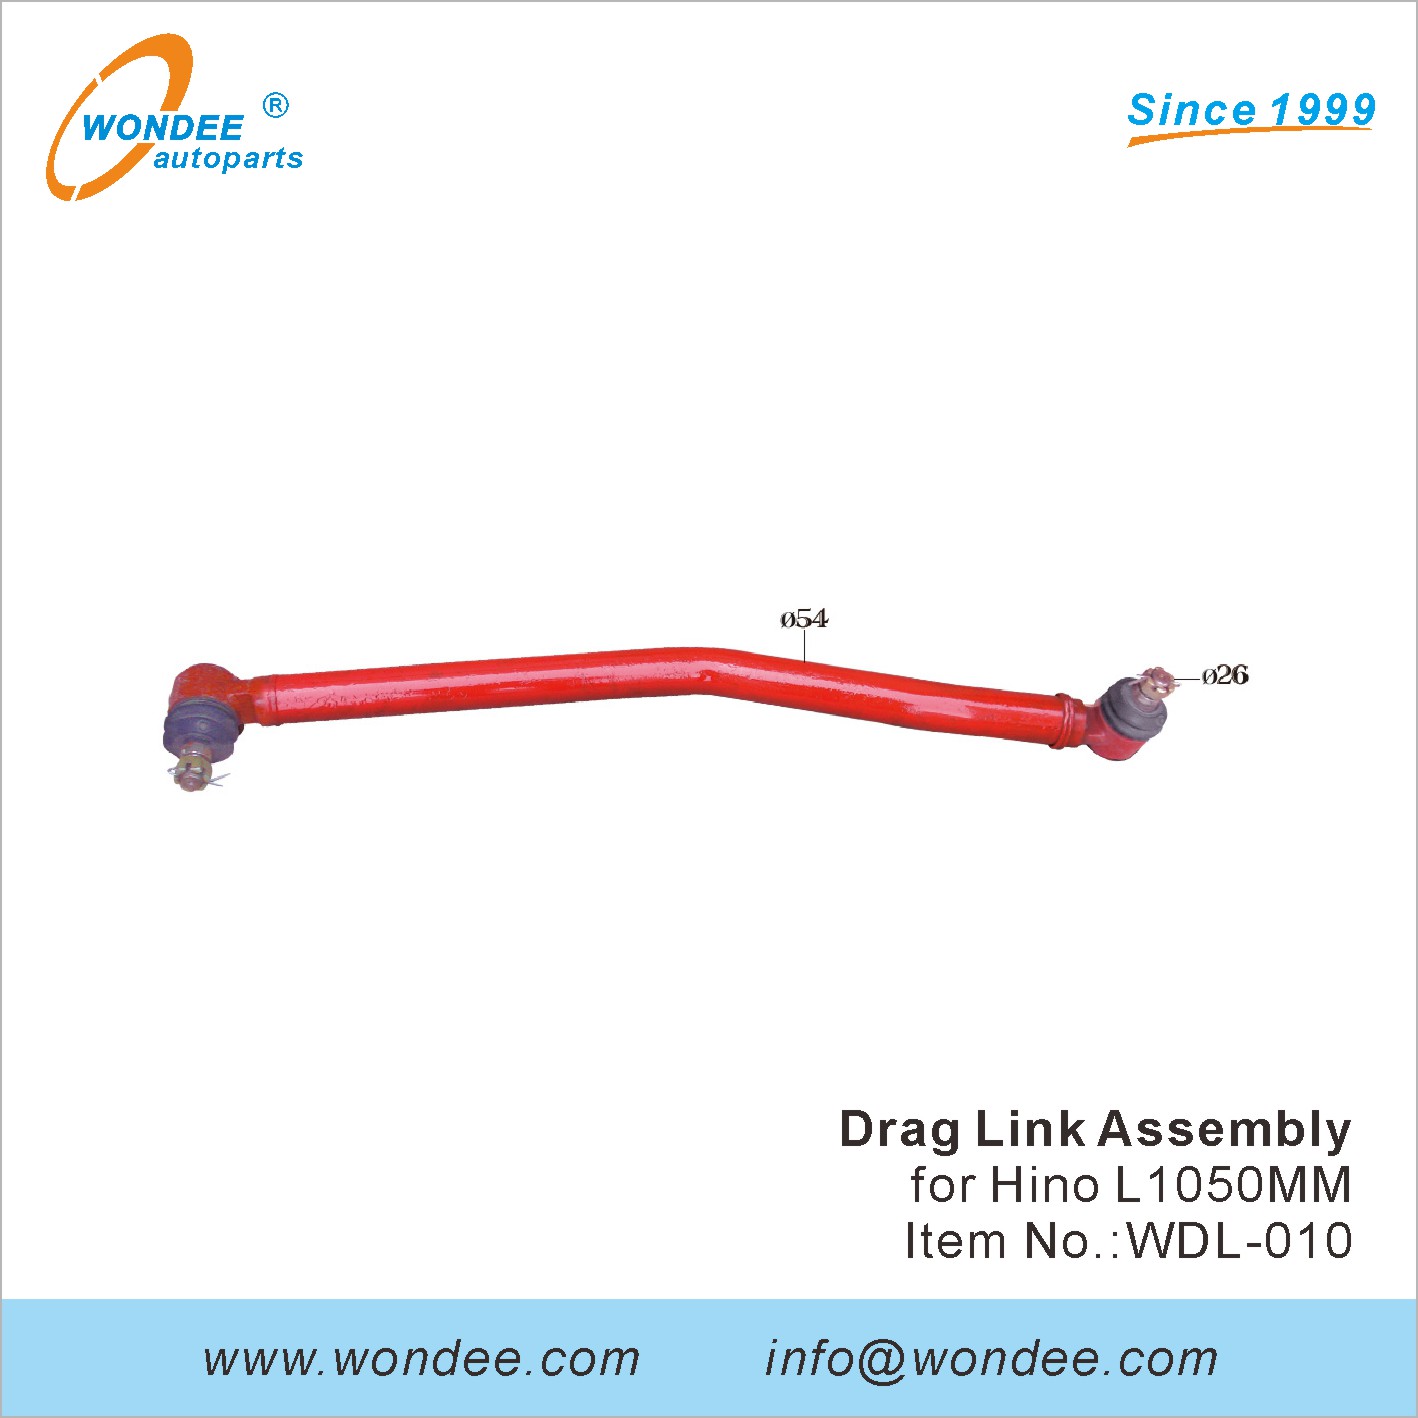 WONDEE drag link assembly (10)